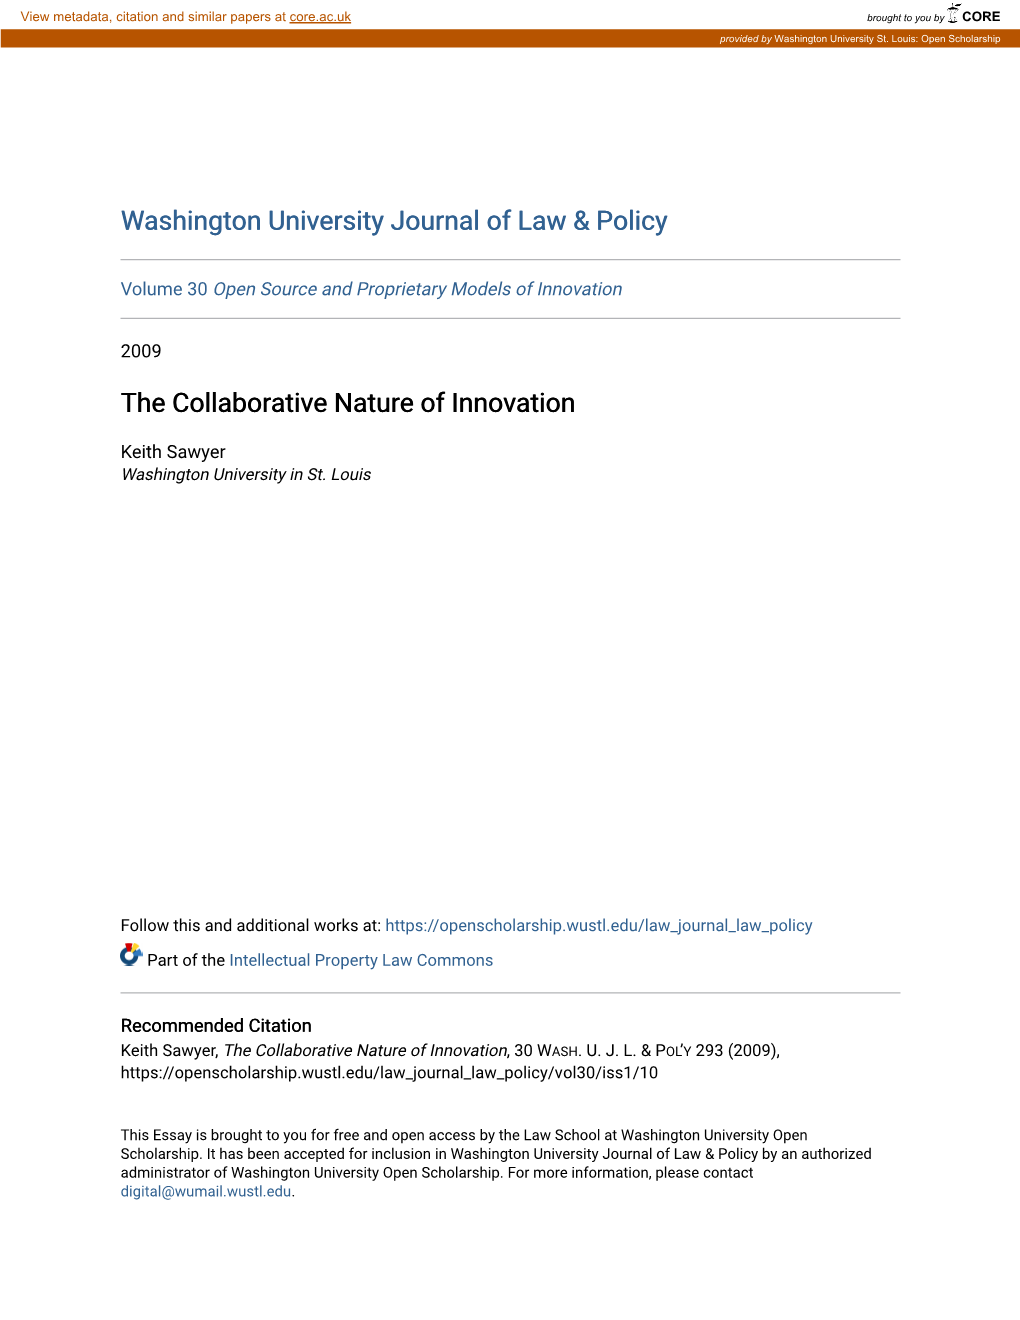 The Collaborative Nature of Innovation